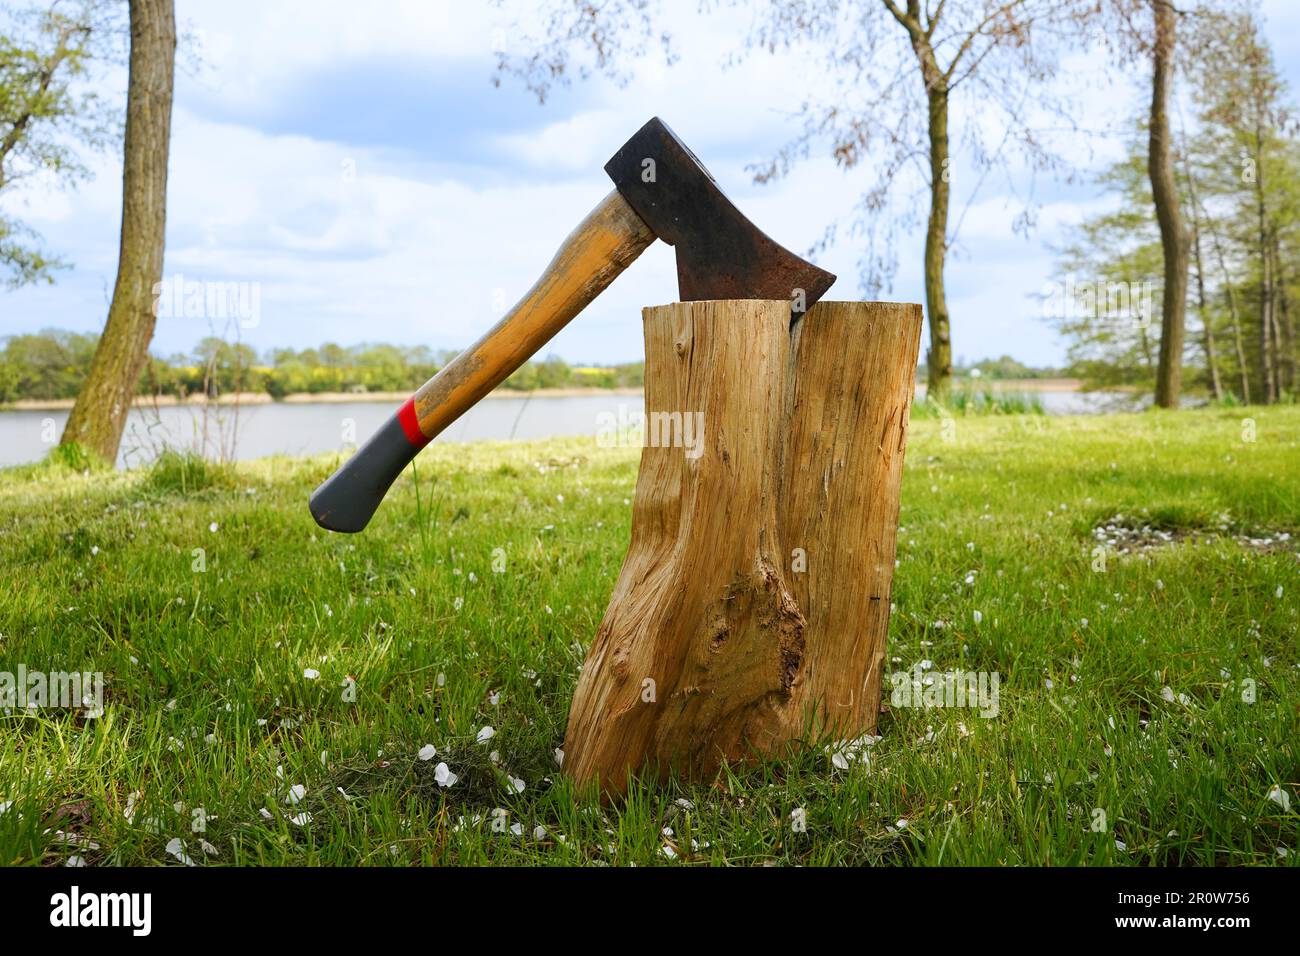 Axe in the stump. Axe impaled in the log. Lake in the background. Stock Photo